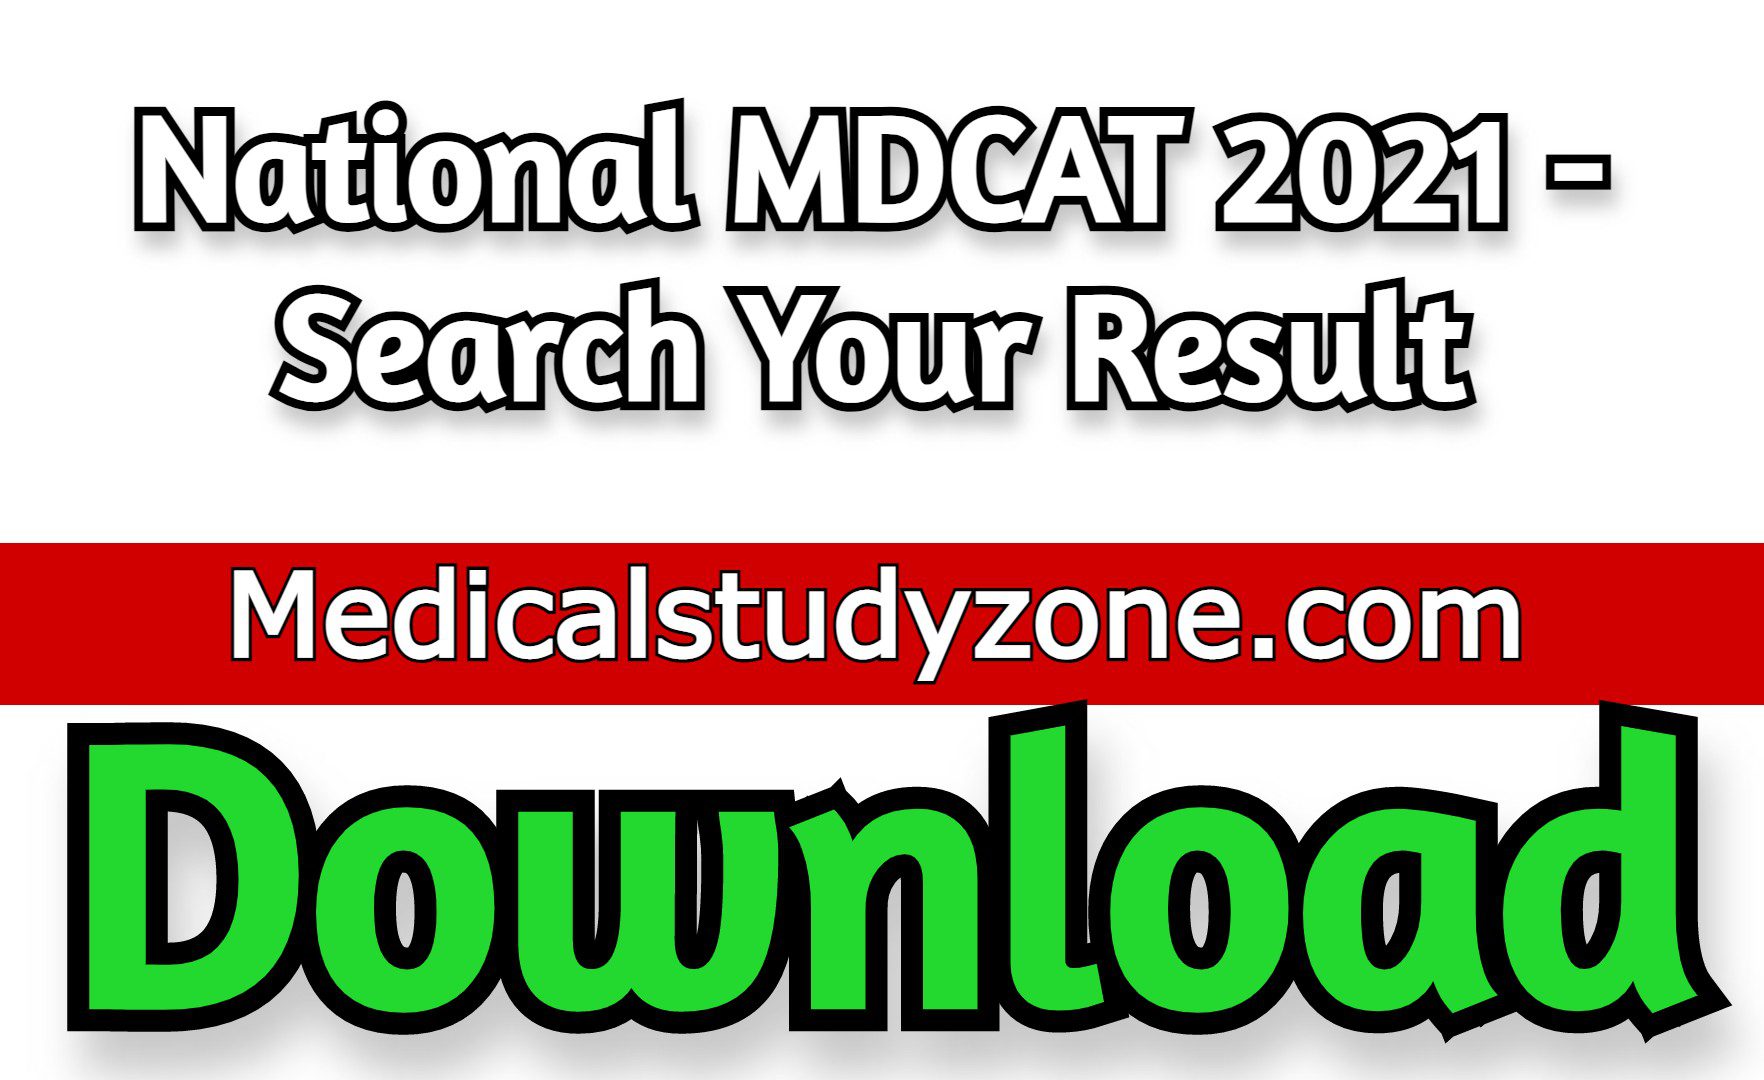 National MDCAT 2021 - Search Your Result